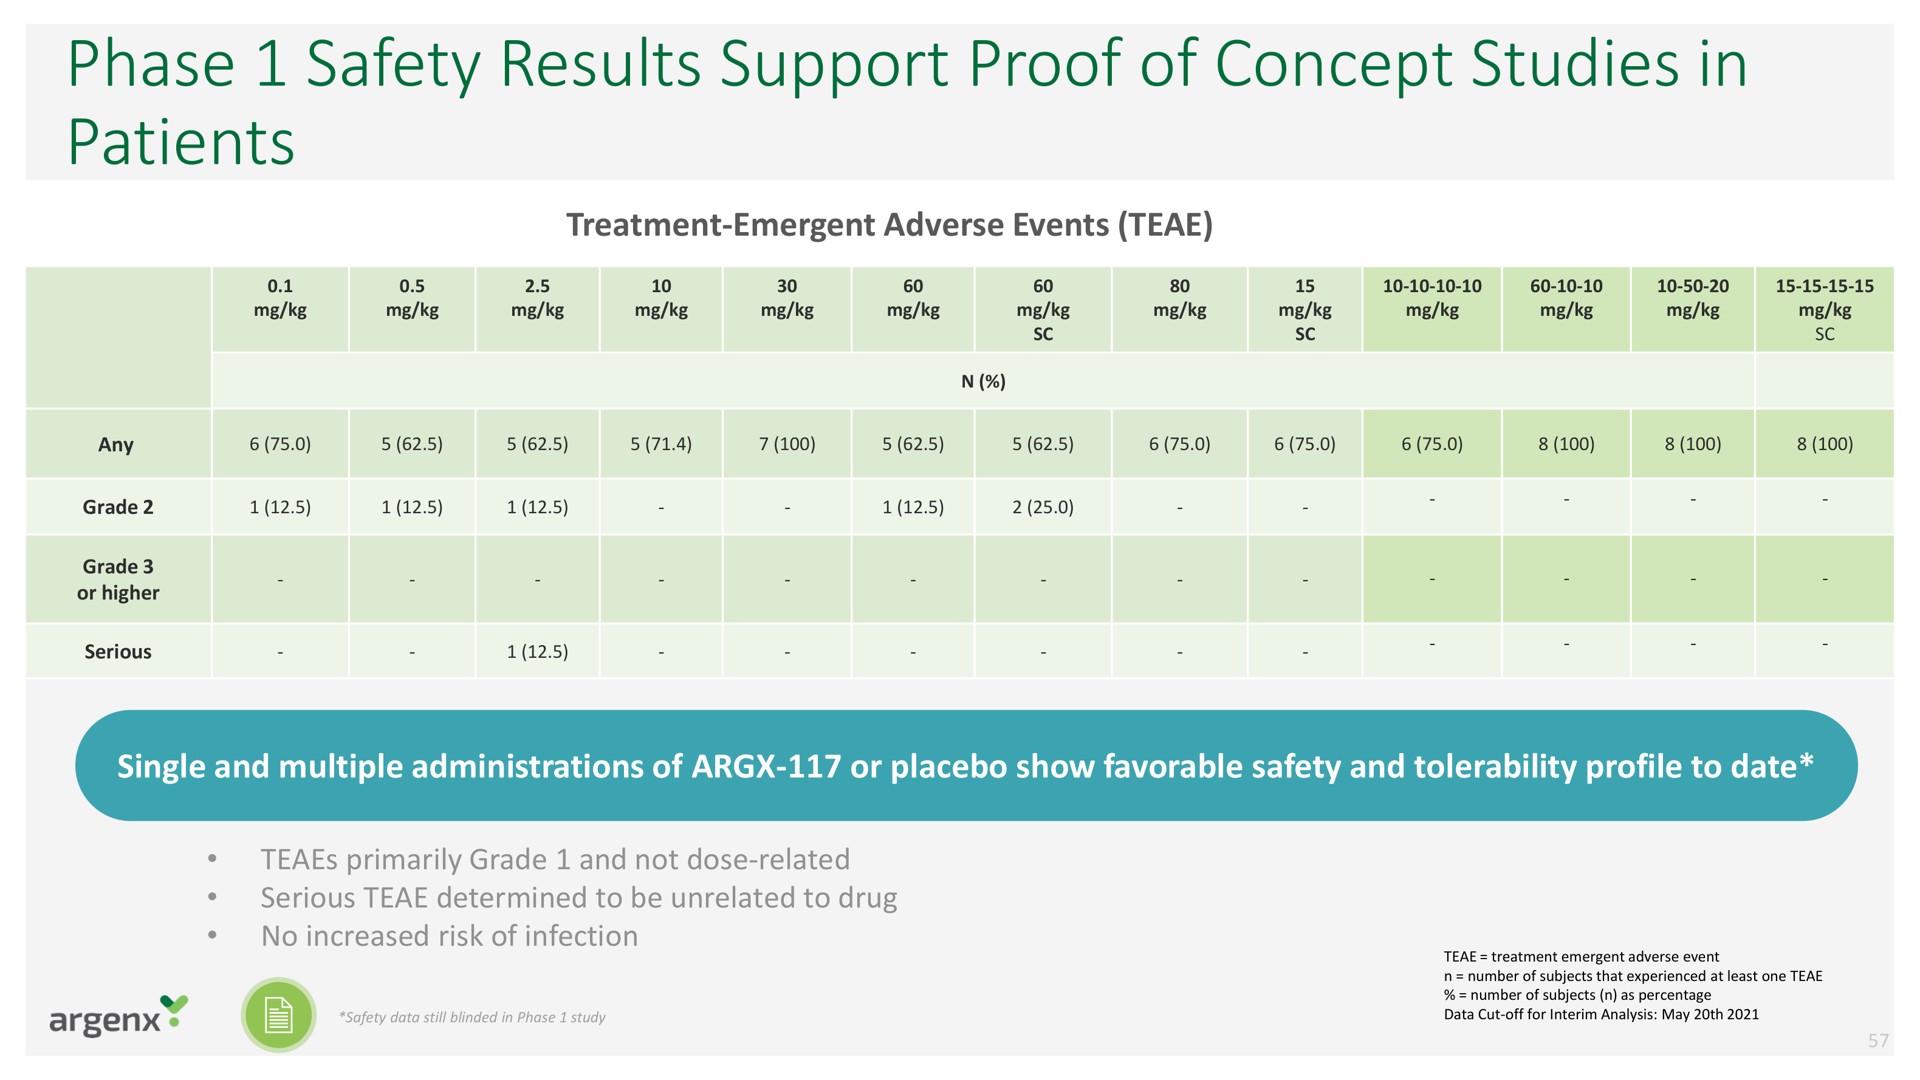 phase safety results support proof of concept studies in patients | argenx SE